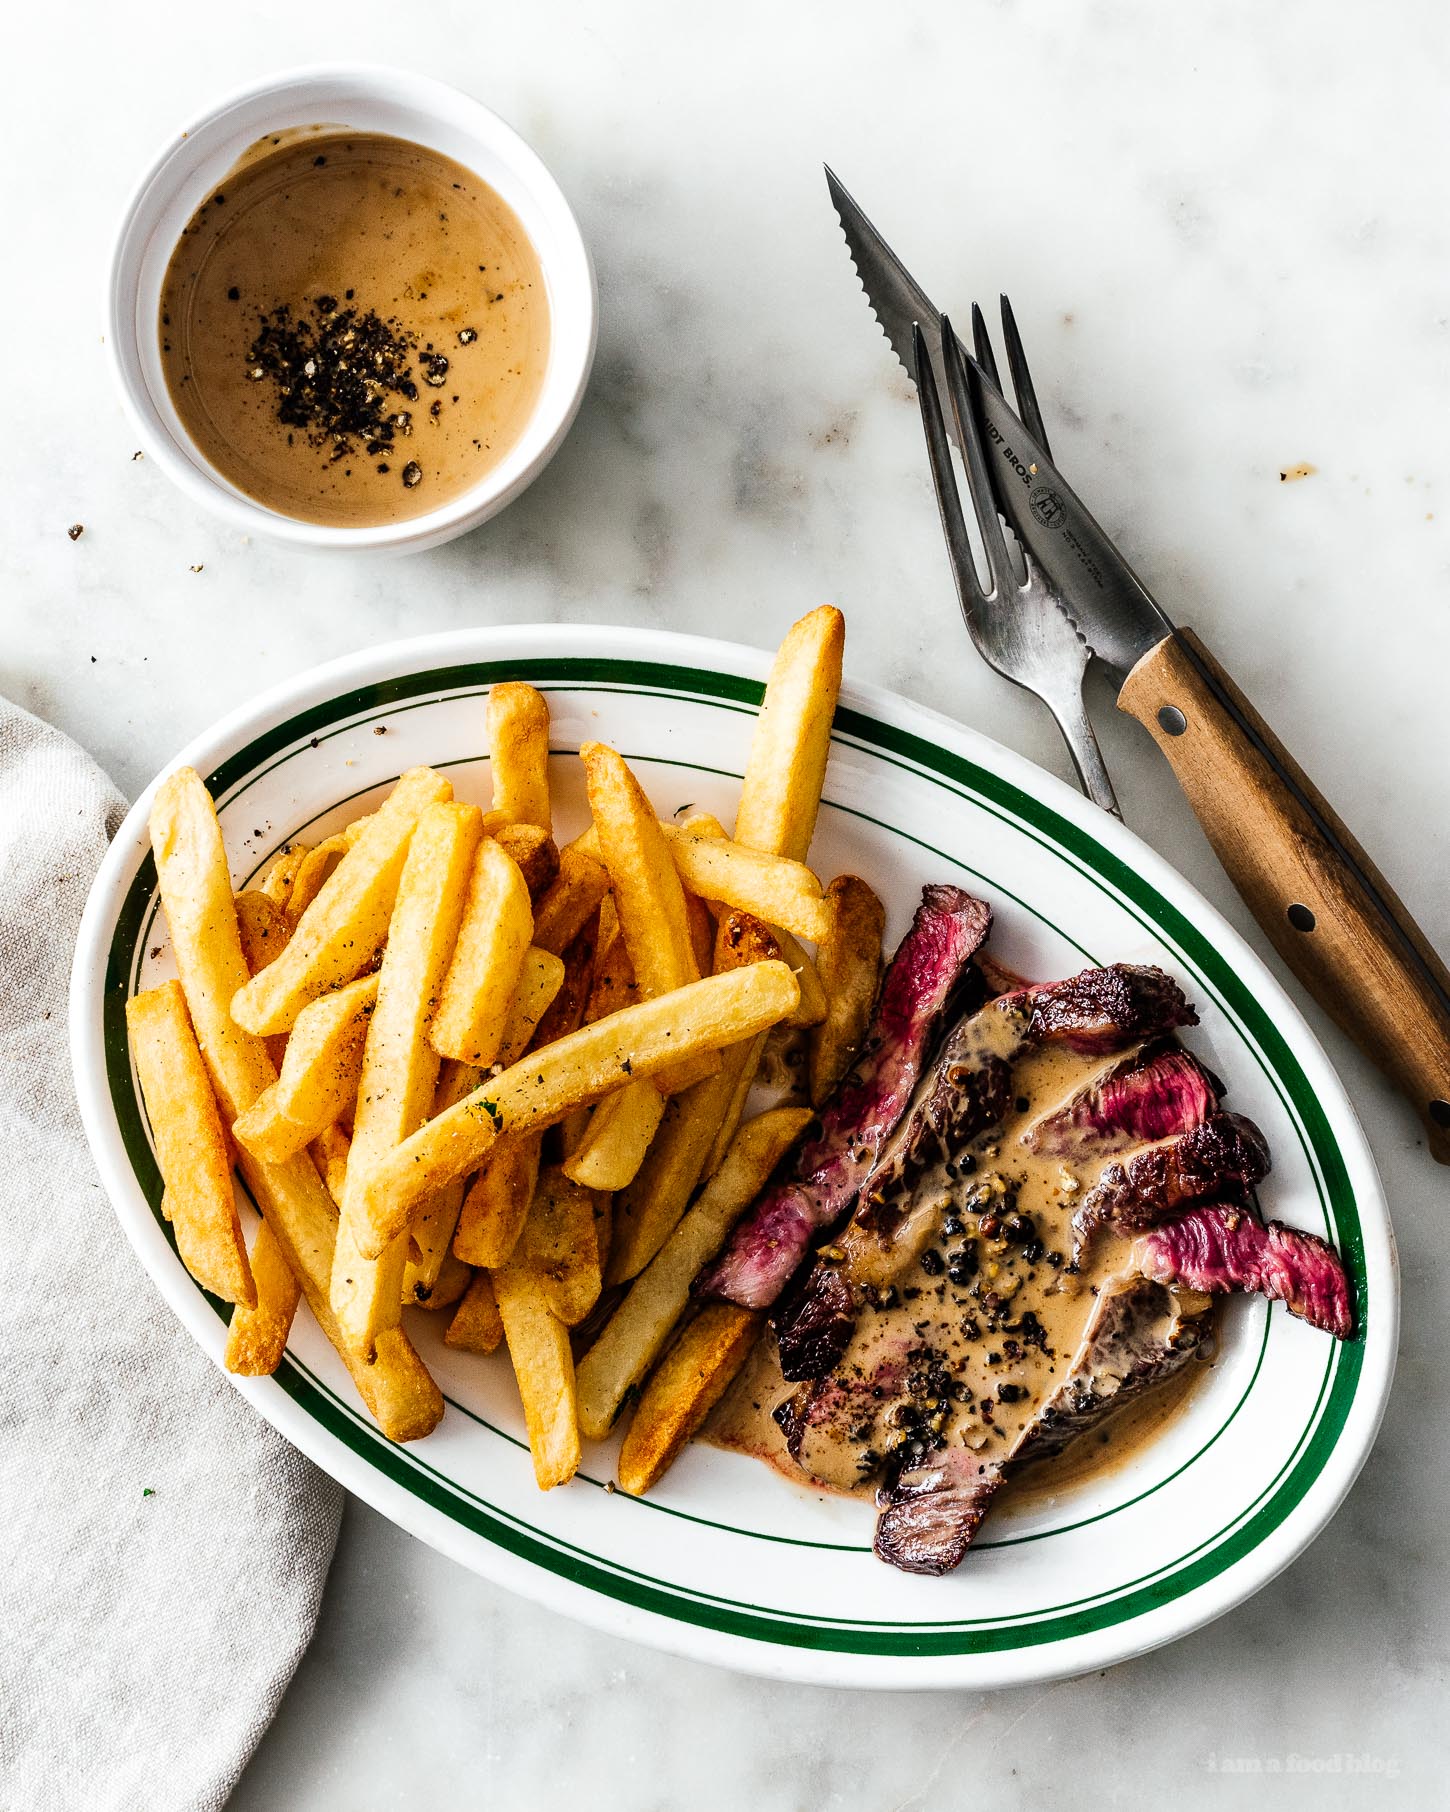 Move over steak spice! Take your steak over the top with these 5 steak sauces that you’ll want to eat with a spoon: mustard cream, classic peppercorn, Japanese Chimichurri, coconut curry, and garlic mushroom. #steak #steakrecipe #recipes #dinner #sauce #steaksauce #reversesearsteak #reversesear